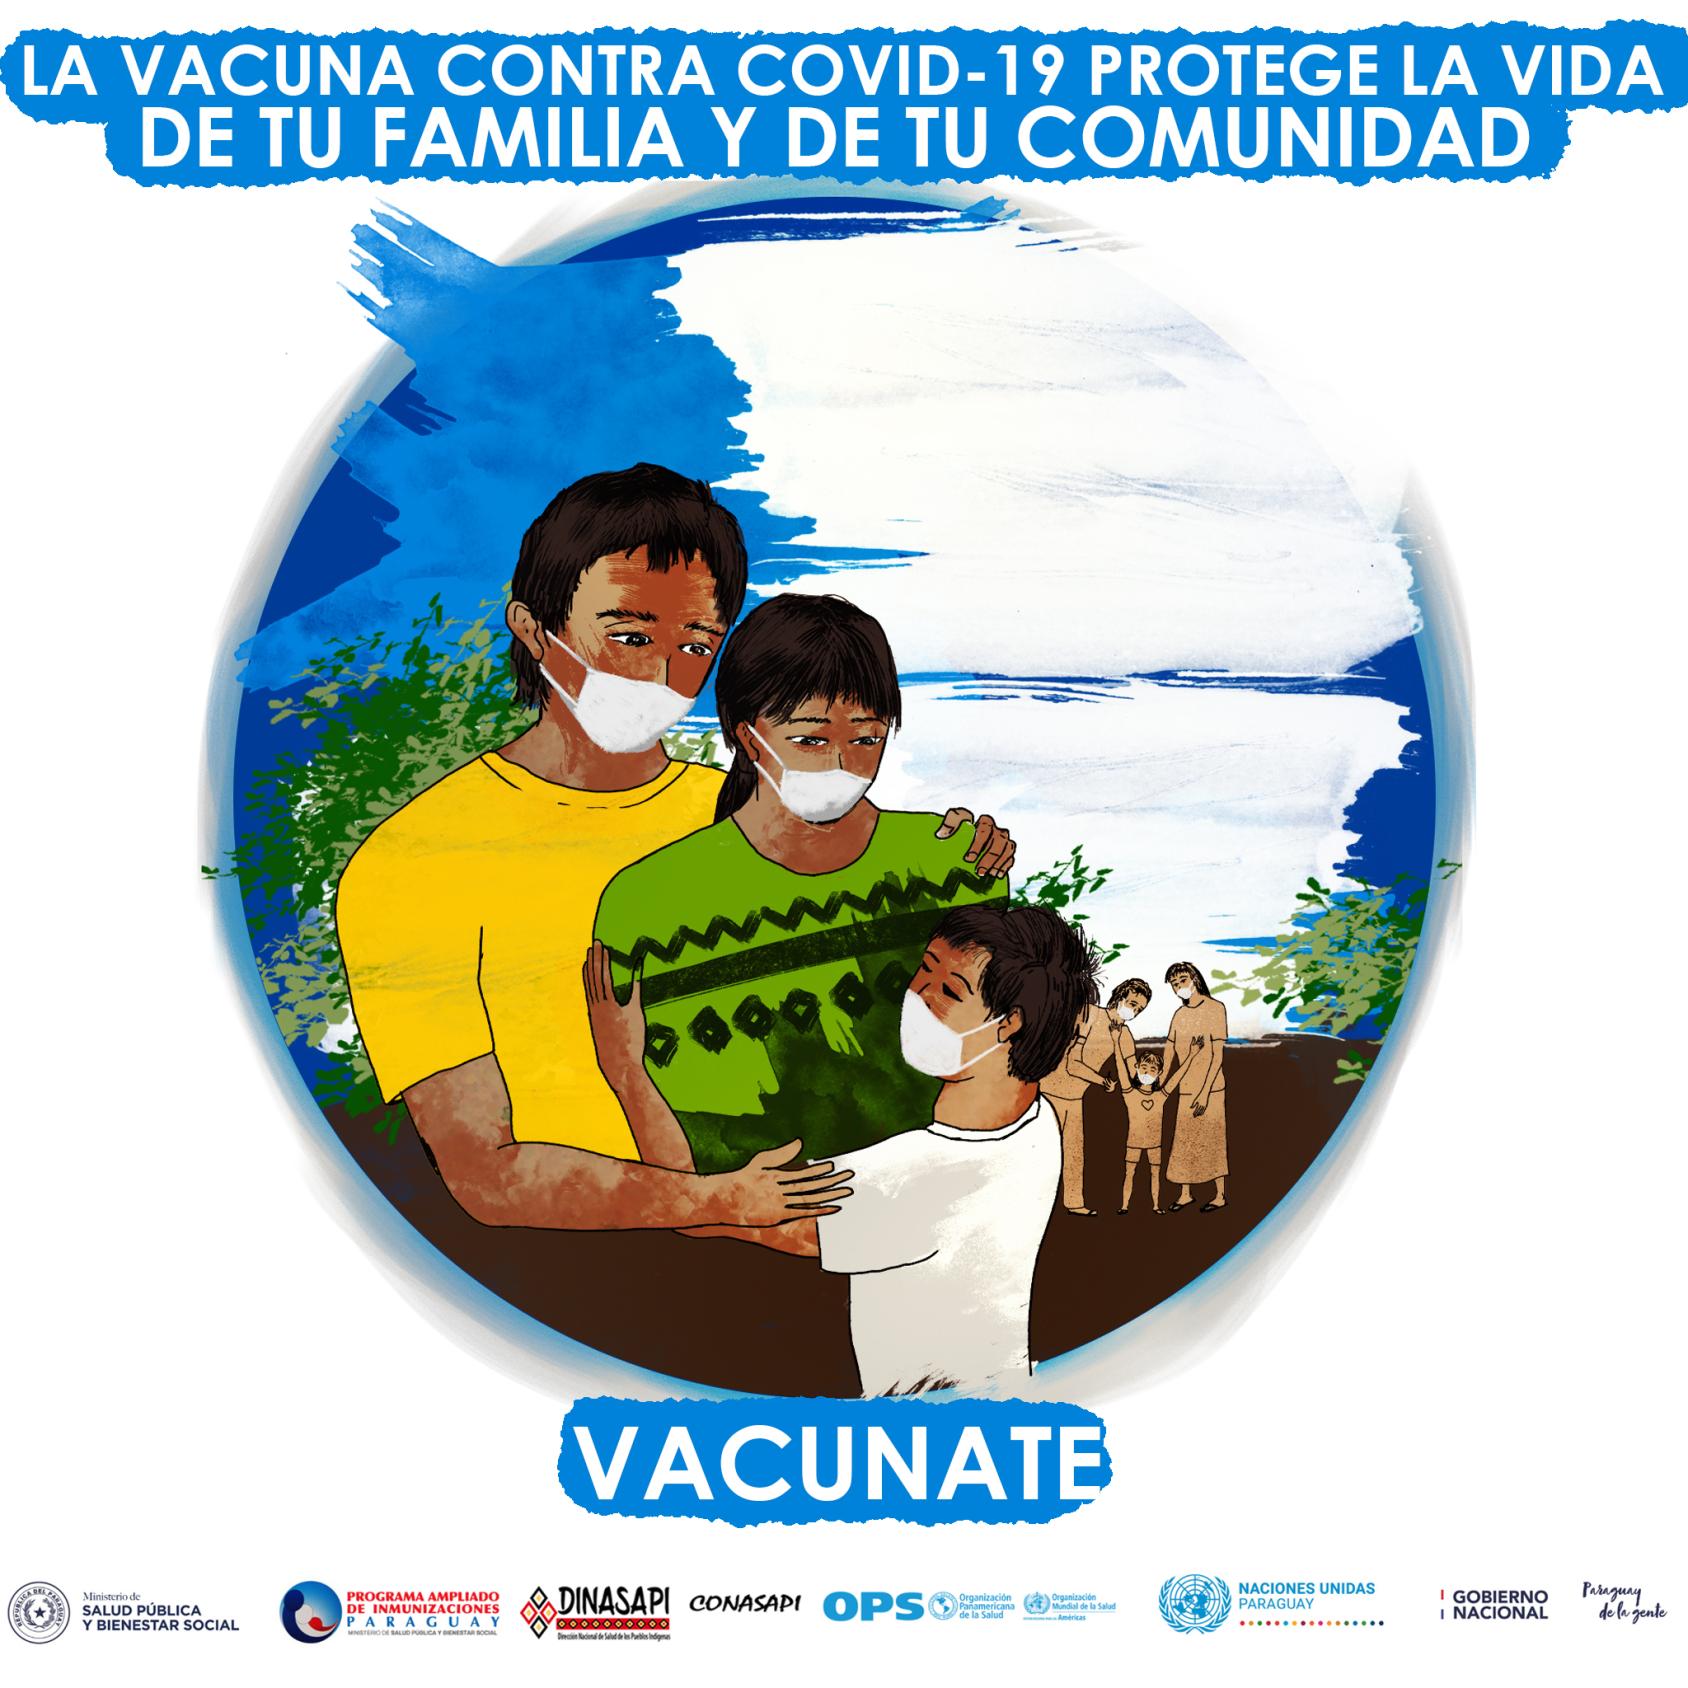 A cartoon image encouraging families to get vaccinated. 